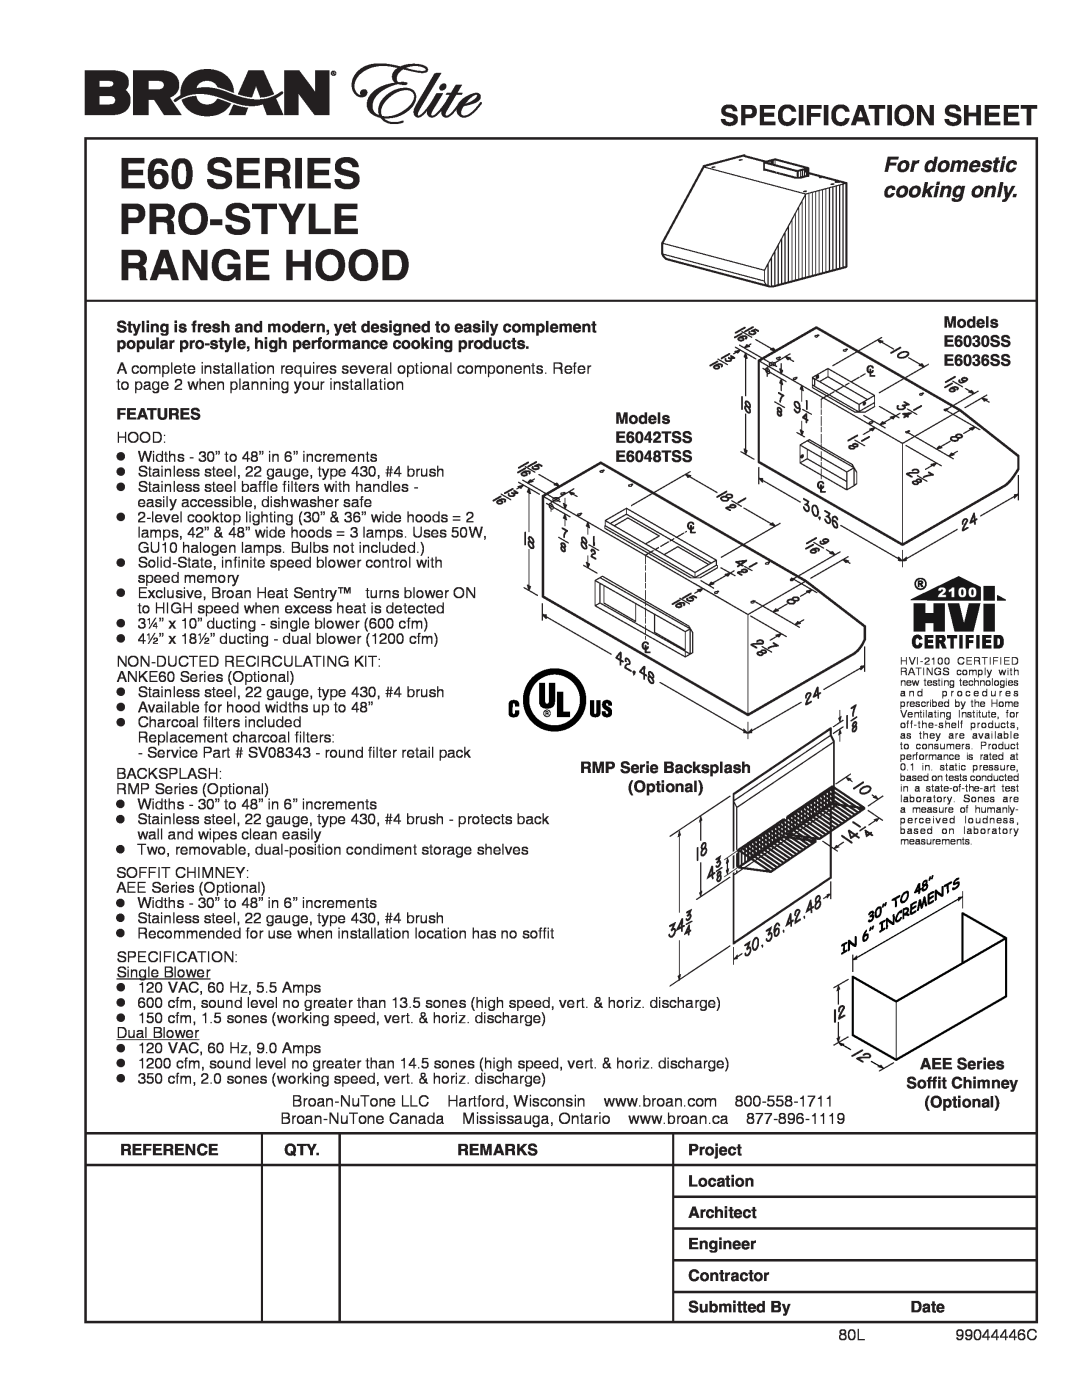 Broan E60 Series specifications E60 SERIES PRO-STYLE RANGE HOOD, Specification Sheet, For domestic cooking only 